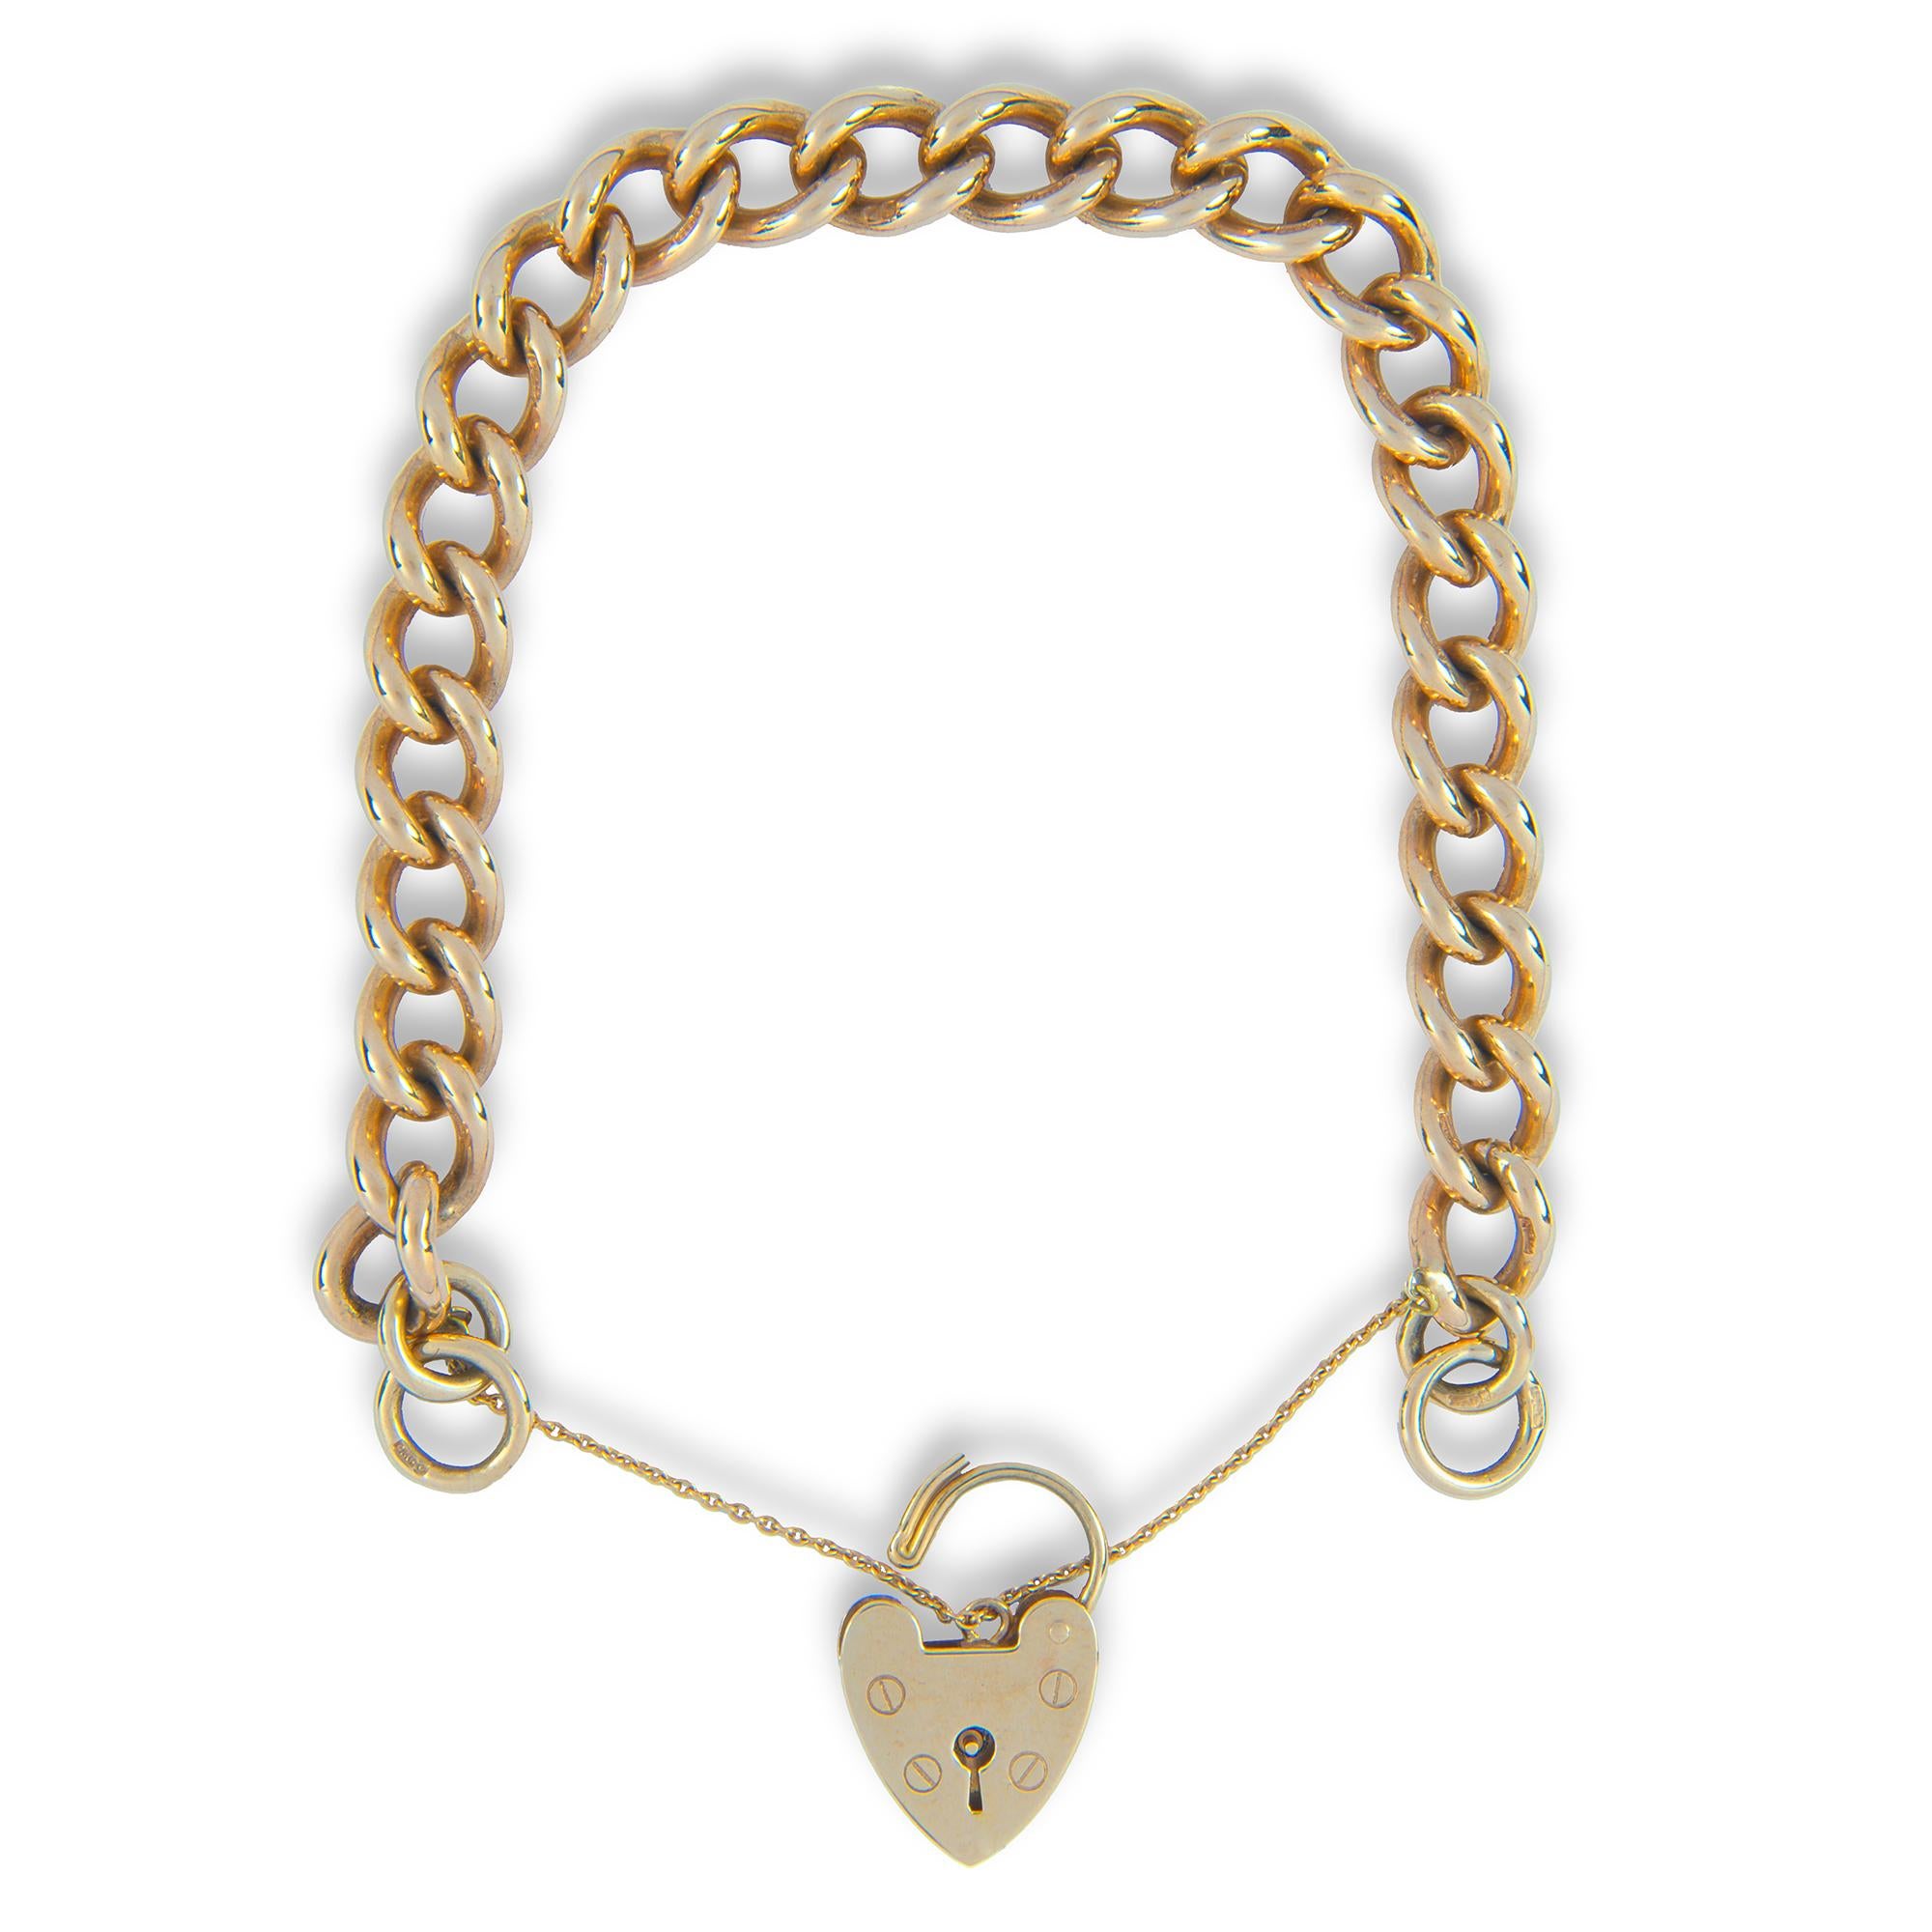 A 9ct yellow gold curb link bracelet attached to a heart shape padlock clasp with safety chain, hallmarked 9ct gold, Birmingham 1971-72, length 21cm, gross weight 33.2 grams.

This bracelet is in vey good condition.

This eye-catching bracelet